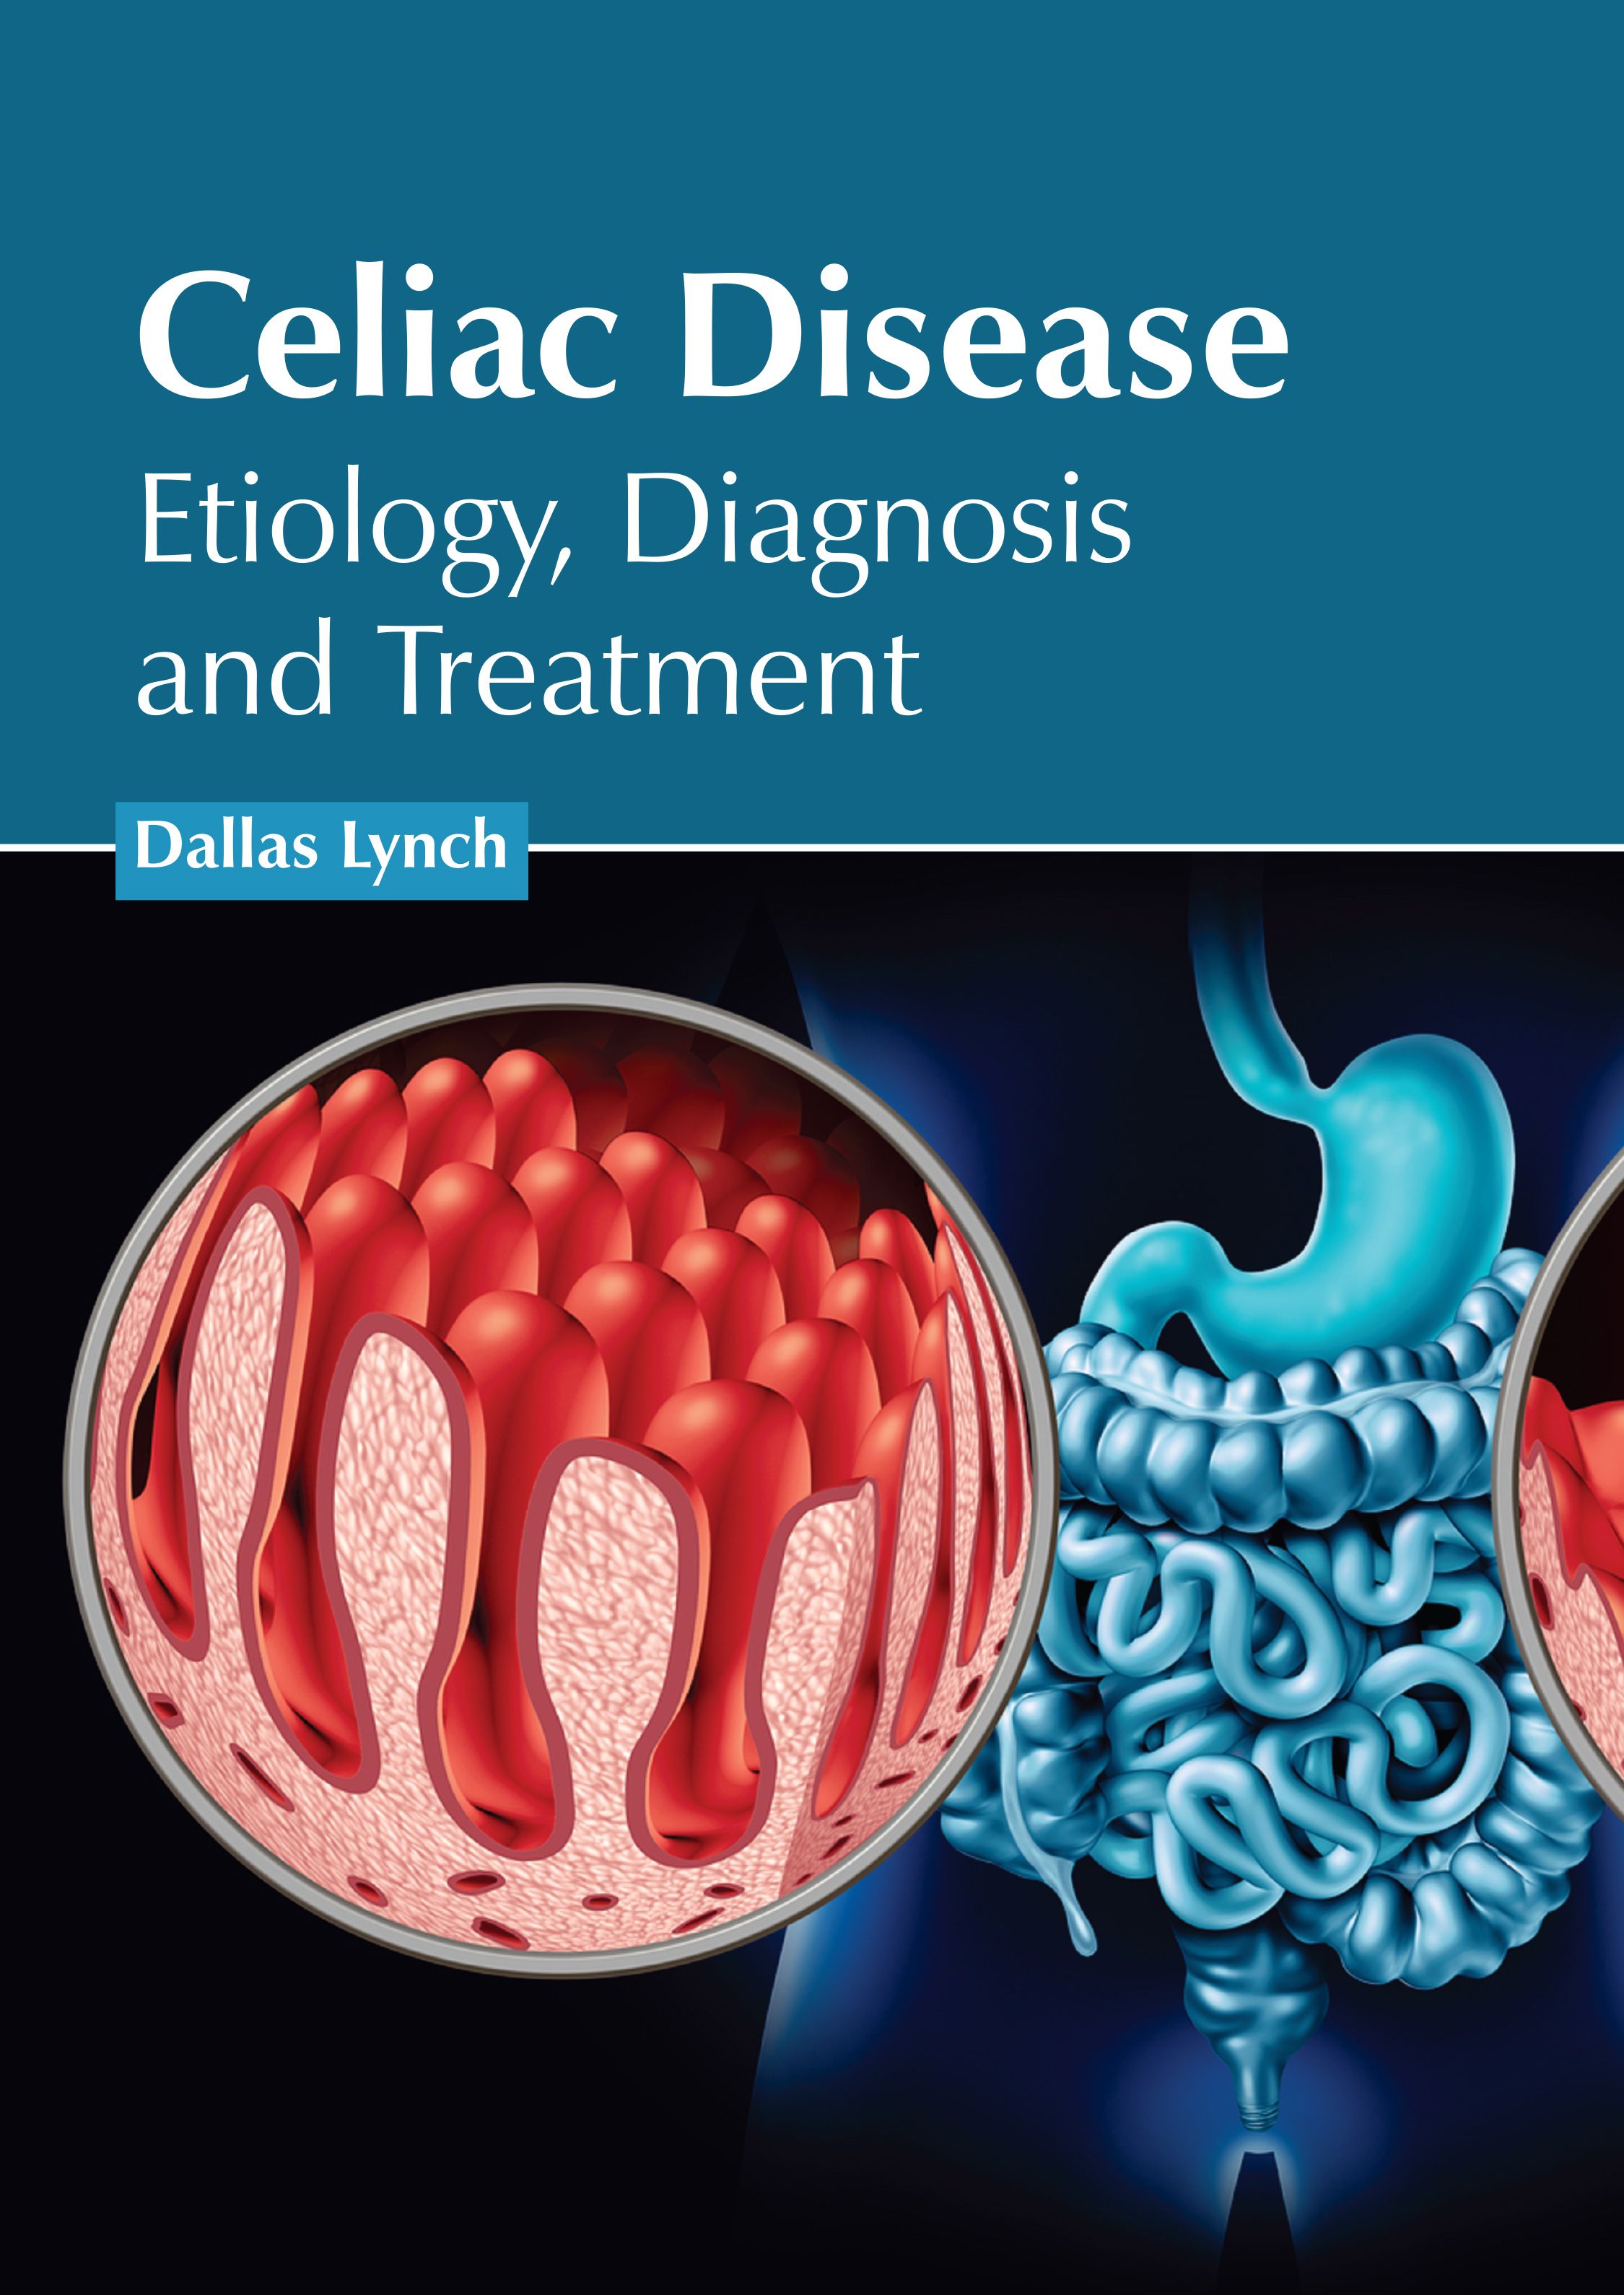 

exclusive-publishers/american-medical-publishers/celiac-disease-etiology-diagnosis-and-treatment-9781639276240